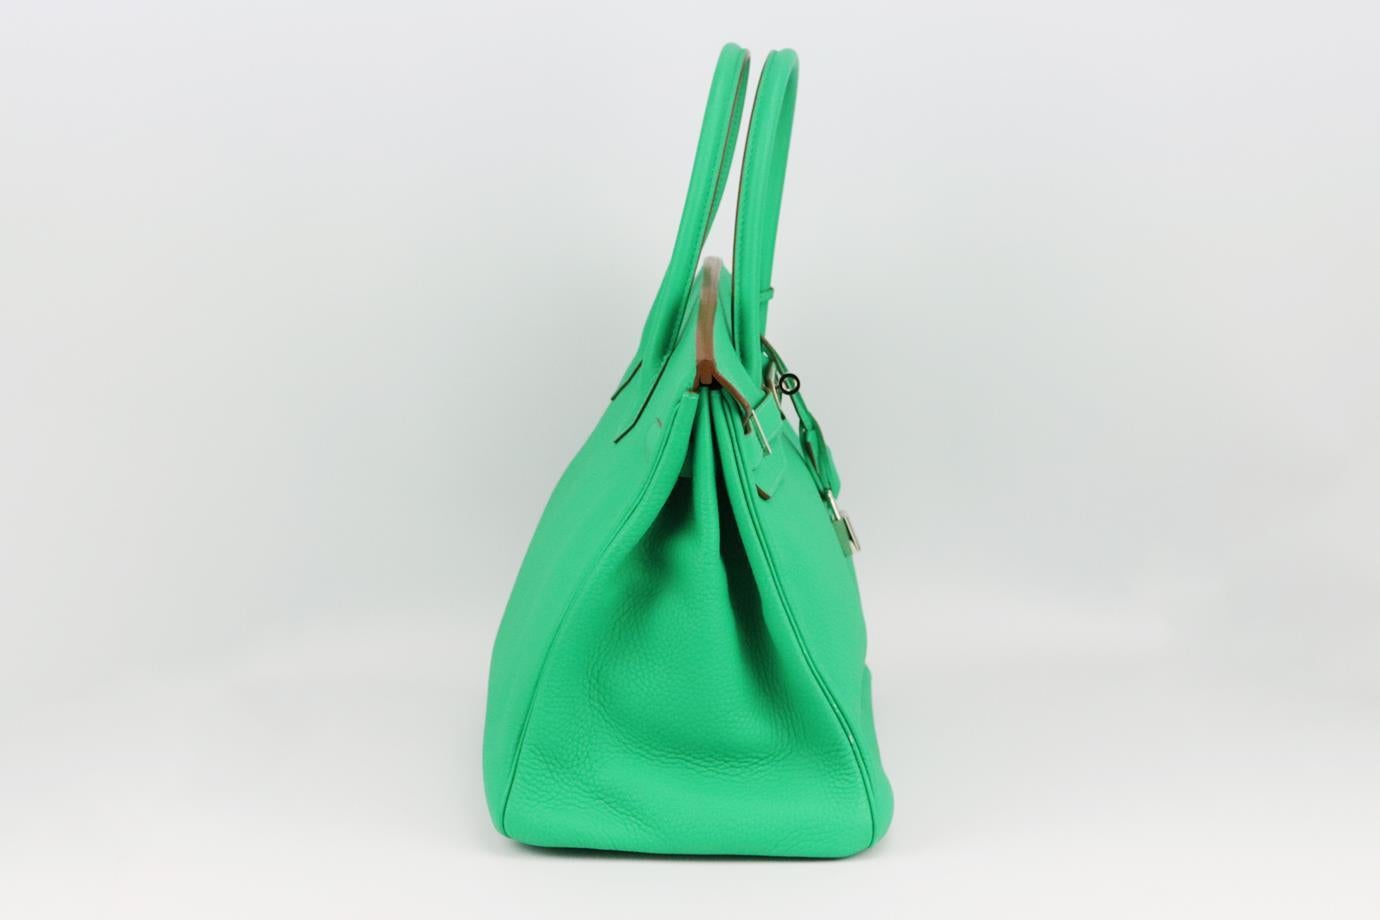 Hermès 2012 Birkin 35cm Togo leather bag. Made in France, this beautiful 2012 Hermès ‘Birkin’ handbag has been made from green ‘Togo’ leather exterior in ‘Menthe’ with matching leather interior, this piece is decorated with silver hardware. Green